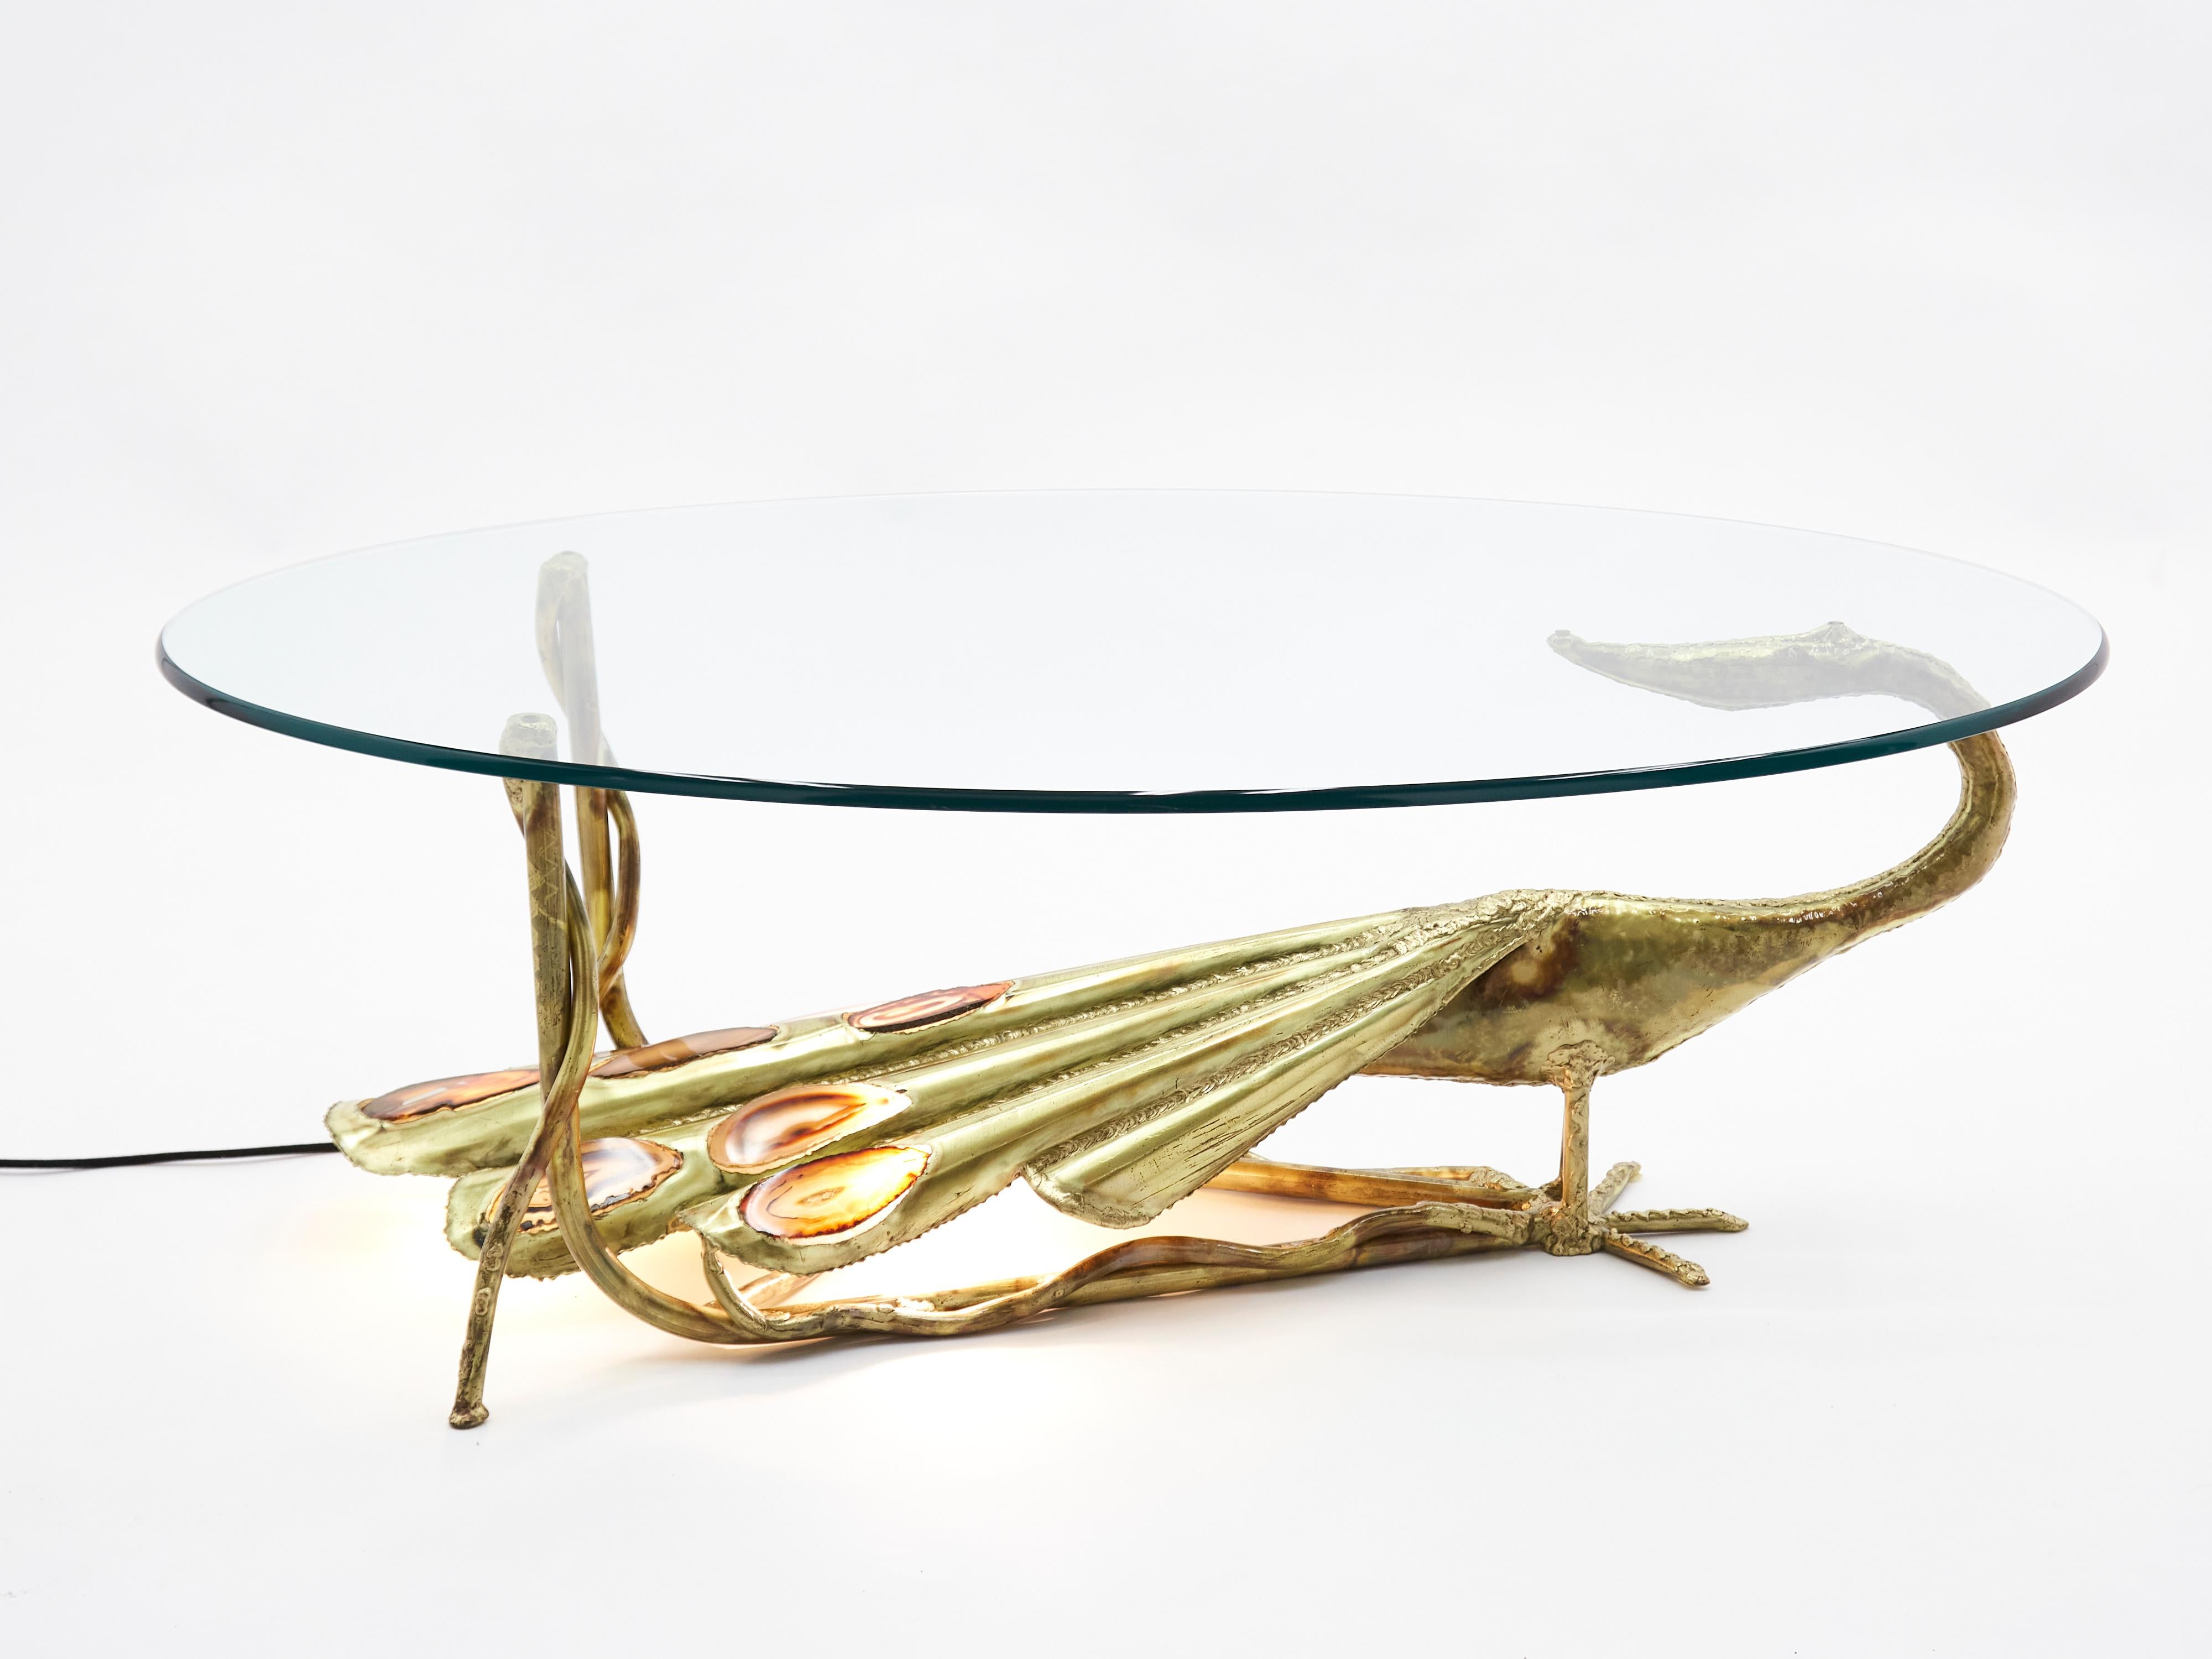 This unique signed Henri Fernandez 1970s coffee table radiates eclectic flair. Produced for Maison Honoré Paris in the late 1970s, it features a bevelled glass top that reveals a beautiful bronze peacock sculpture with mesmerising agate stones. The